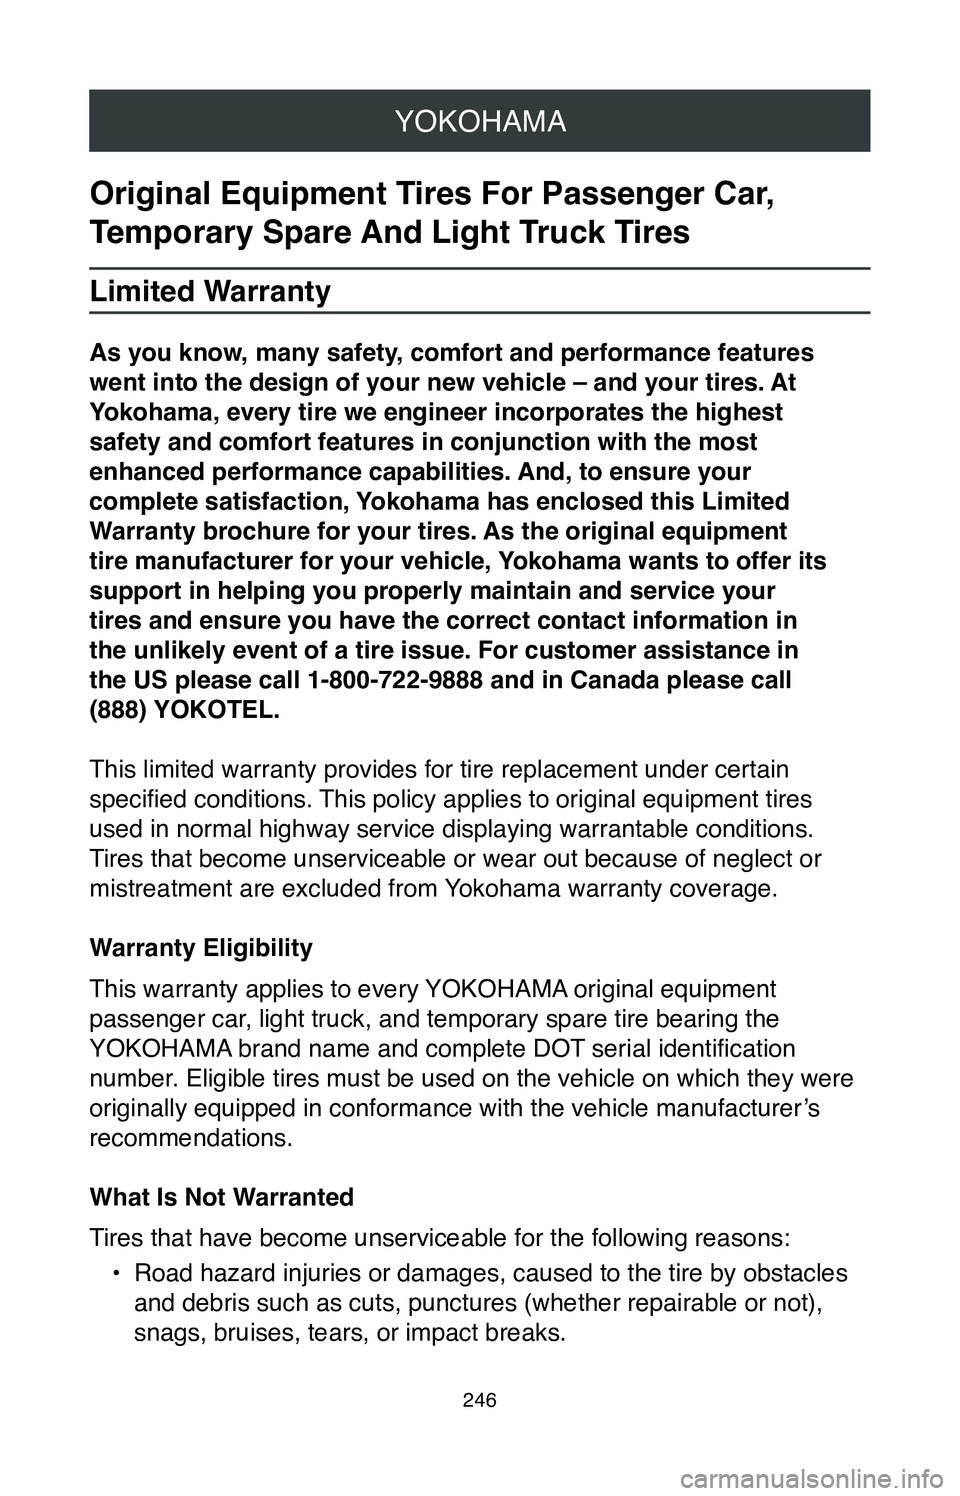 TOYOTA MIRAI 2020  Warranties & Maintenance Guides (in English) YOKOHAMA
246
Original Equipment Tires For Passenger Car, 
Temporary Spare And Light Truck Tires
Limited Warranty
As you know, many safety, comfort and performance features 
went into the design of you